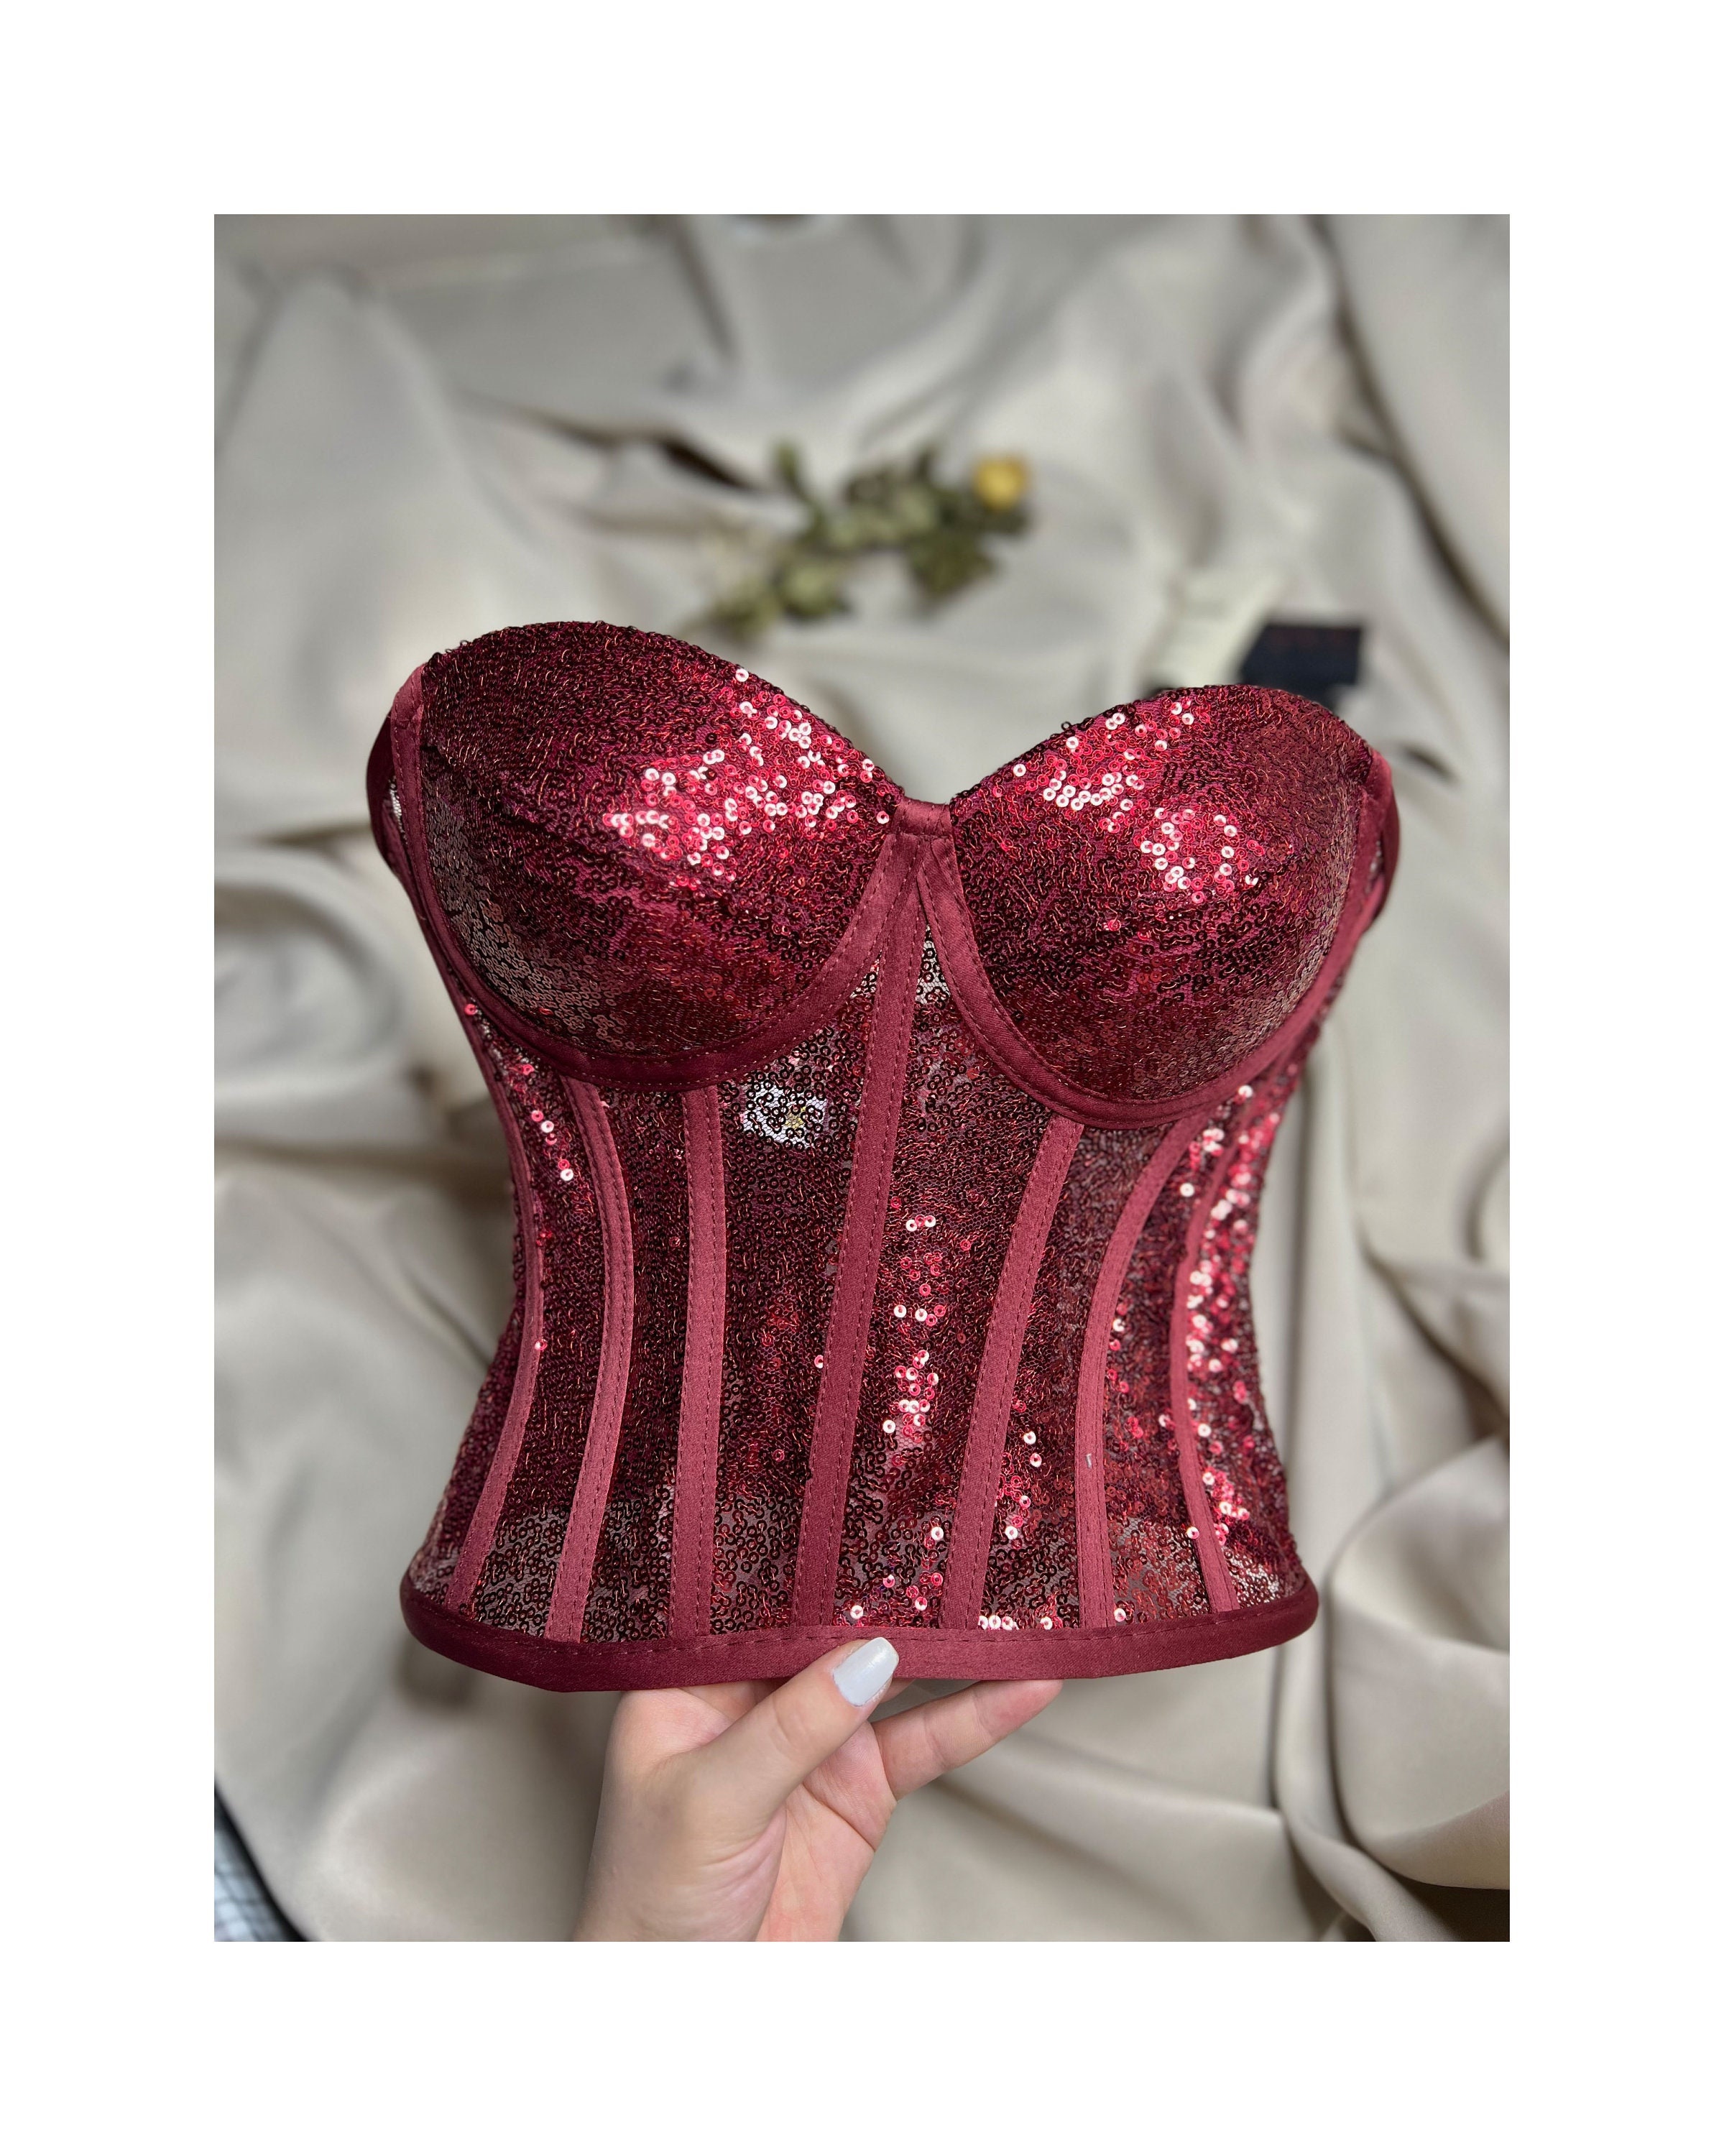 Burgundy Sequin Corset, Sequined Corset, Sequined Bustier, Burgundy Sequin  Corset Top, Party, Costume, Cosplay and Clubwear. 